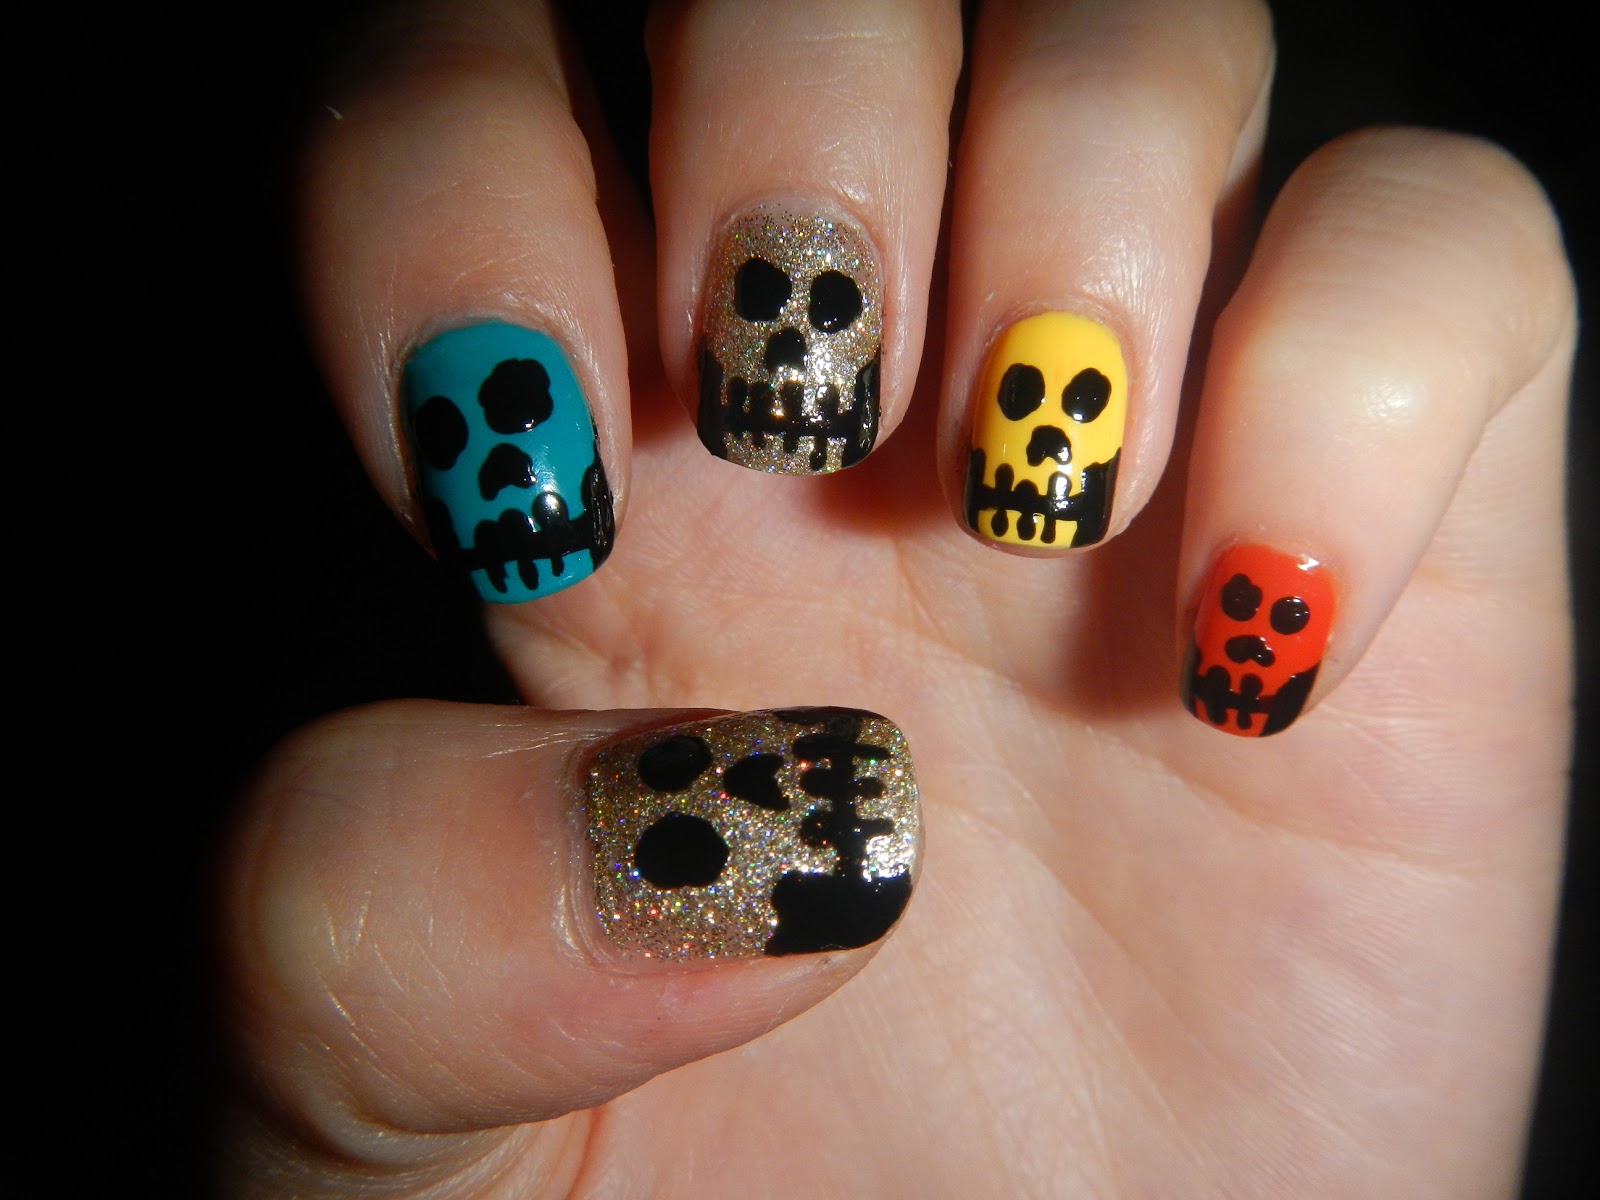 10. "DIY Skull Nail Art with Stamping" - wide 3